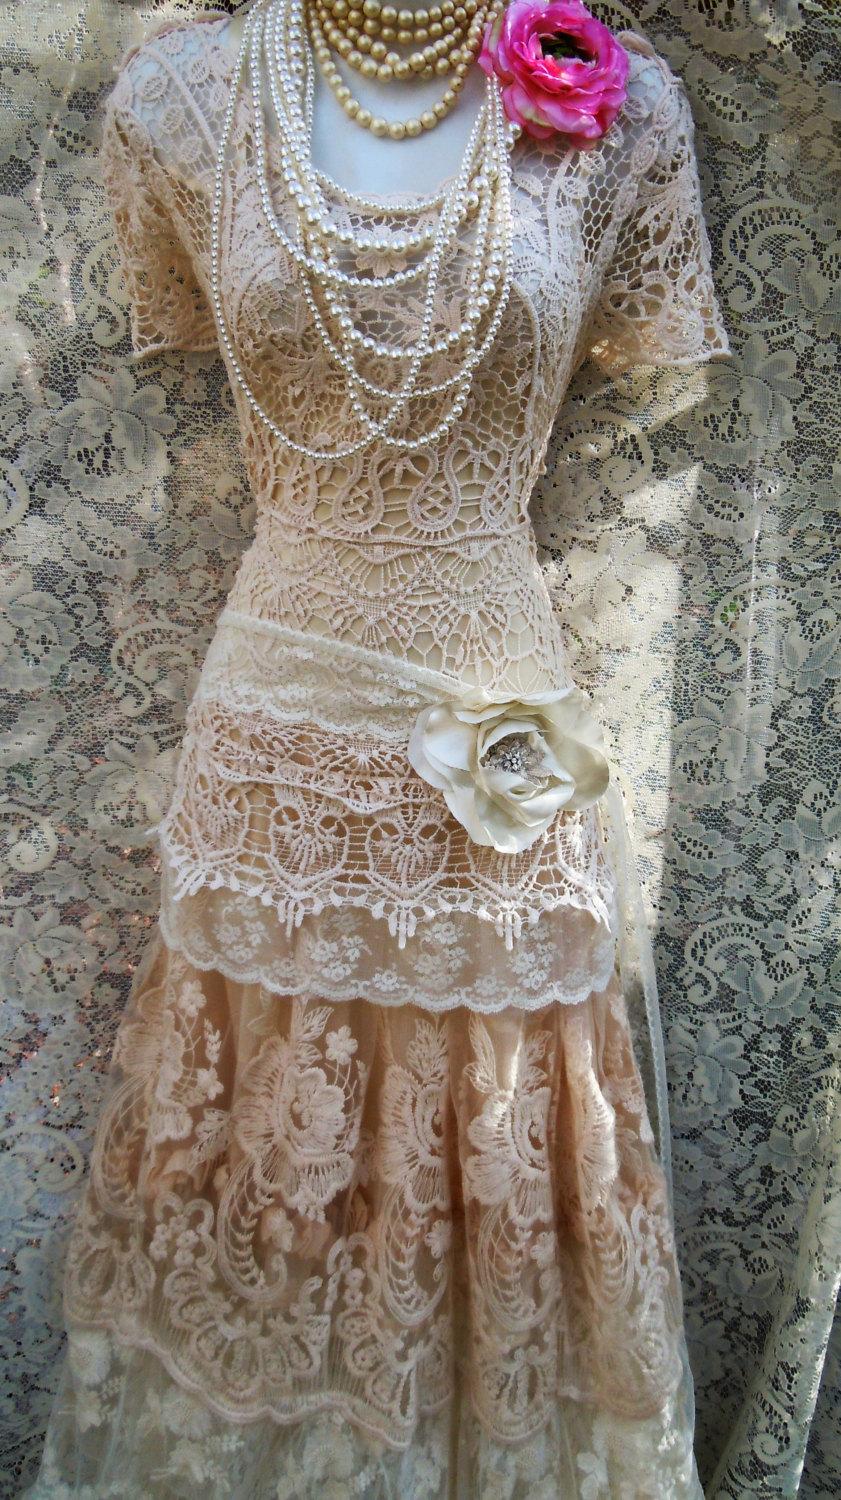 Wedding - Boho lace dress wedding cream crochet  tulle tiered   flapper  vintage  bride outdoor  romantic small  by vintage opulence on Etsy